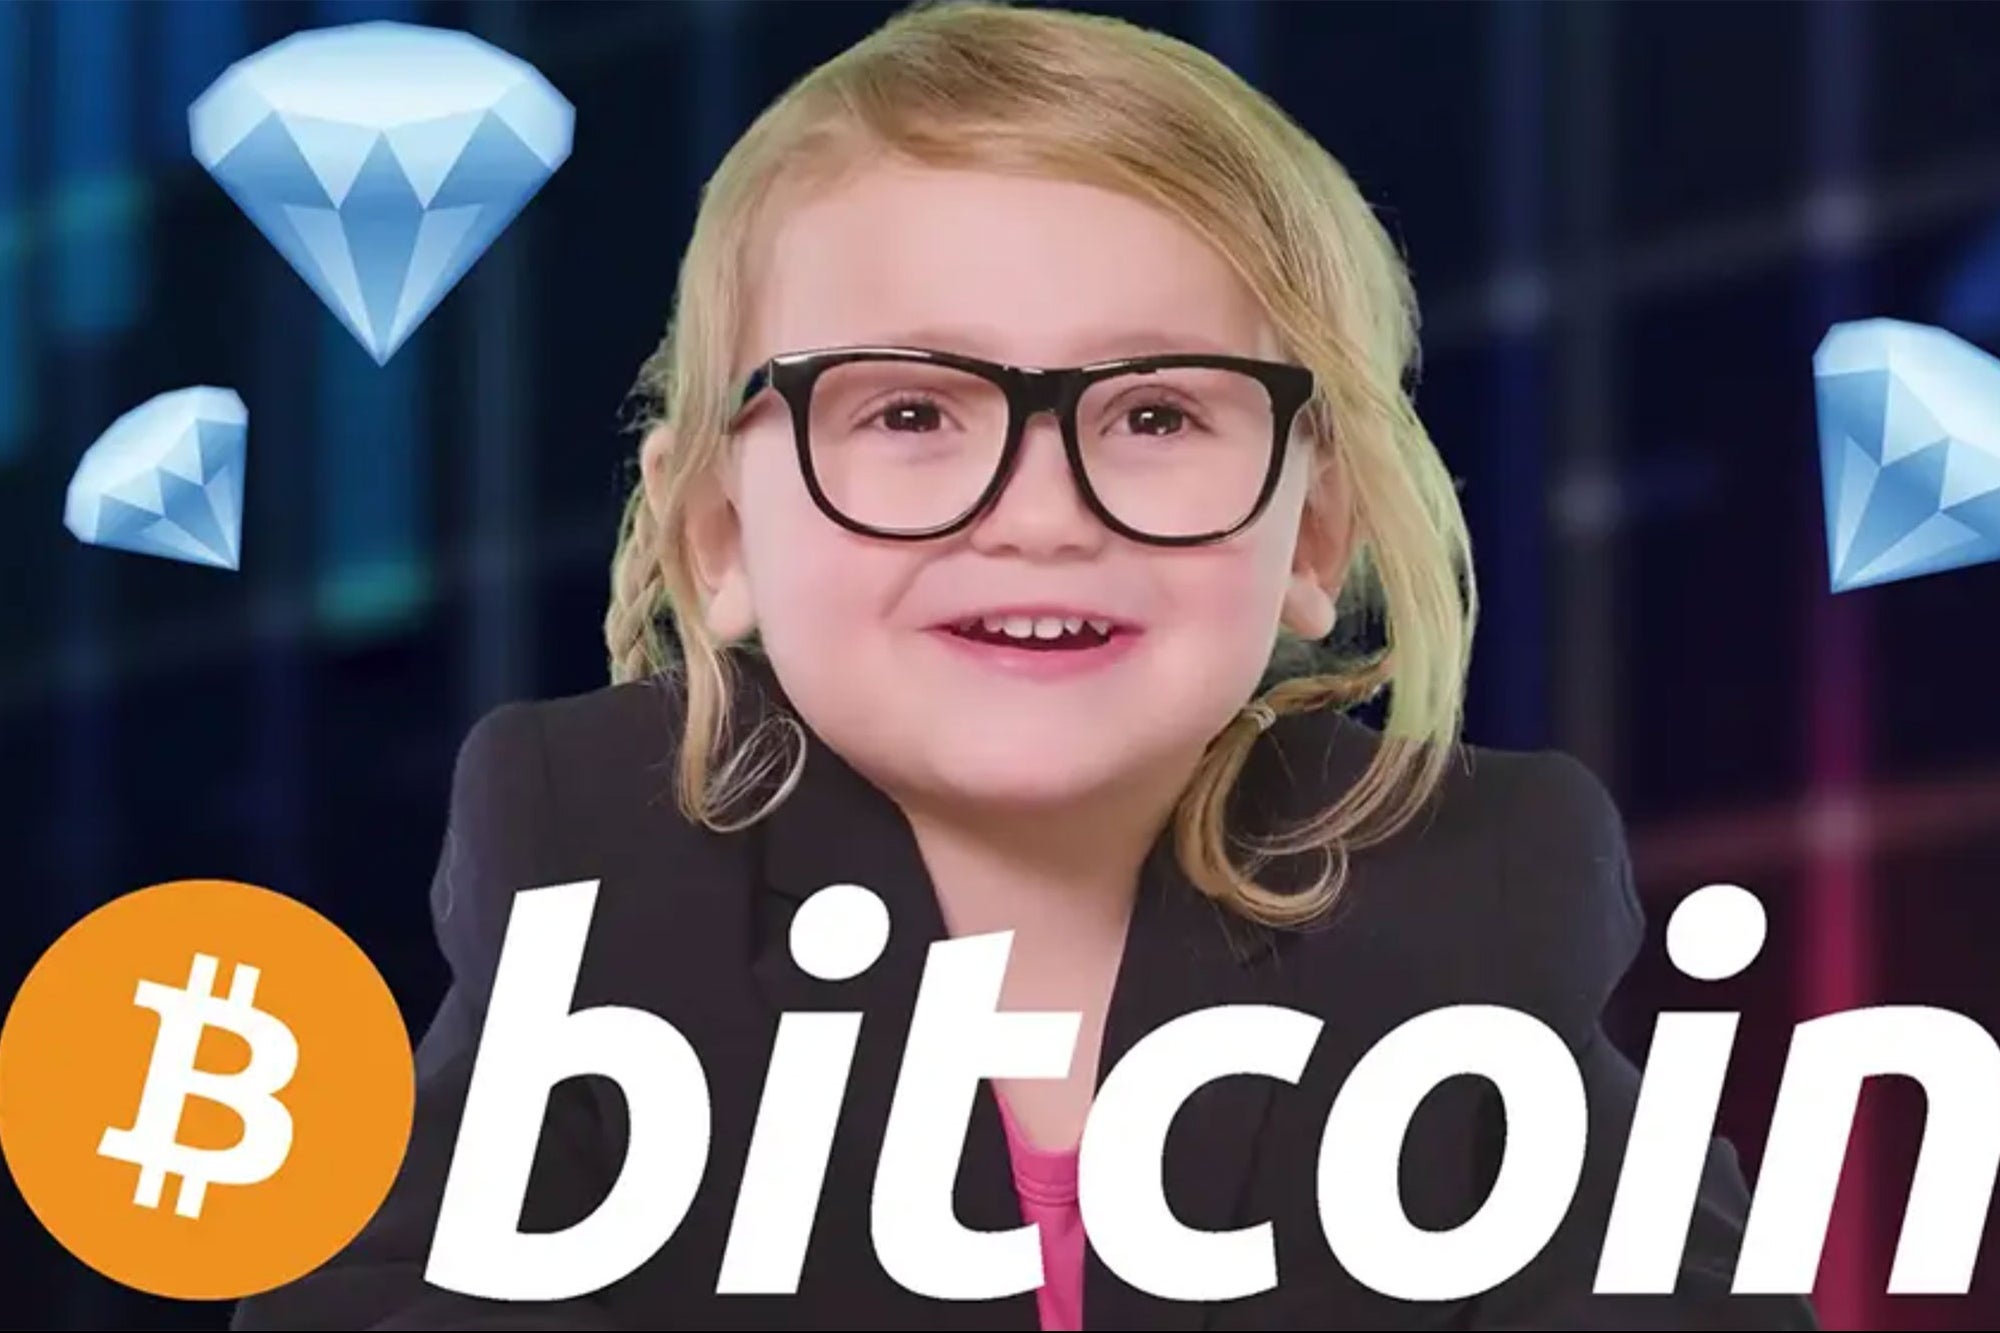 Strike CEO Jack Mallers Explains Bitcoin To Kids On Lily’s Show